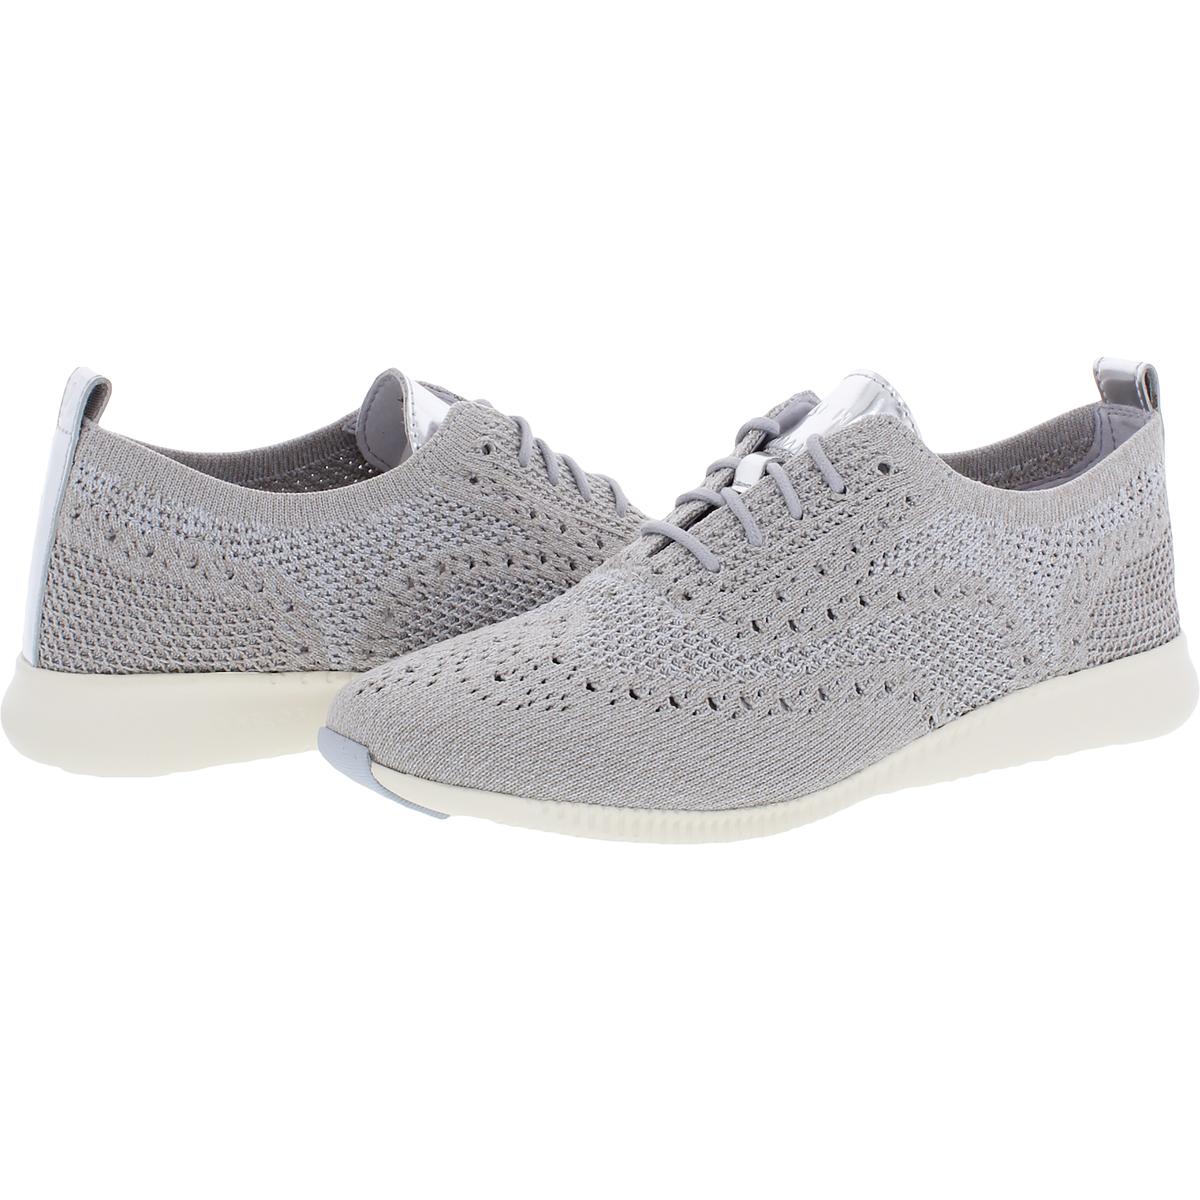 Cole Haan Womens 2 Zerogrand Fitness Casual Fashion Sneakers Athletic ...